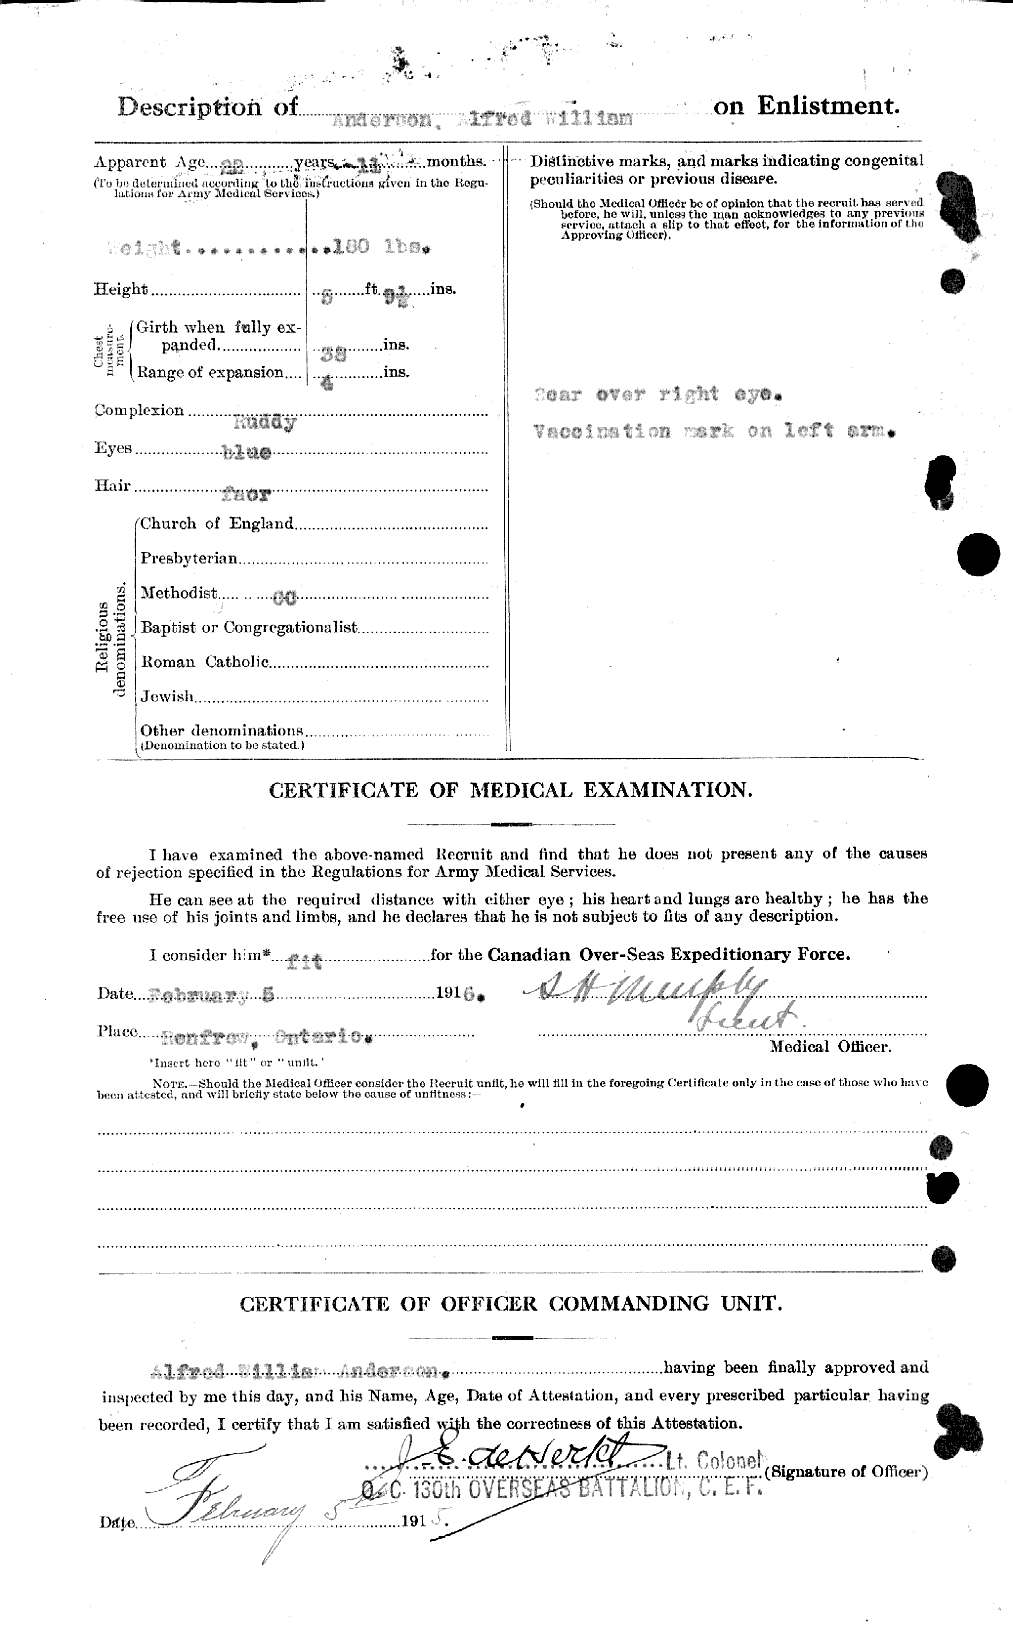 Personnel Records of the First World War - CEF 051284b